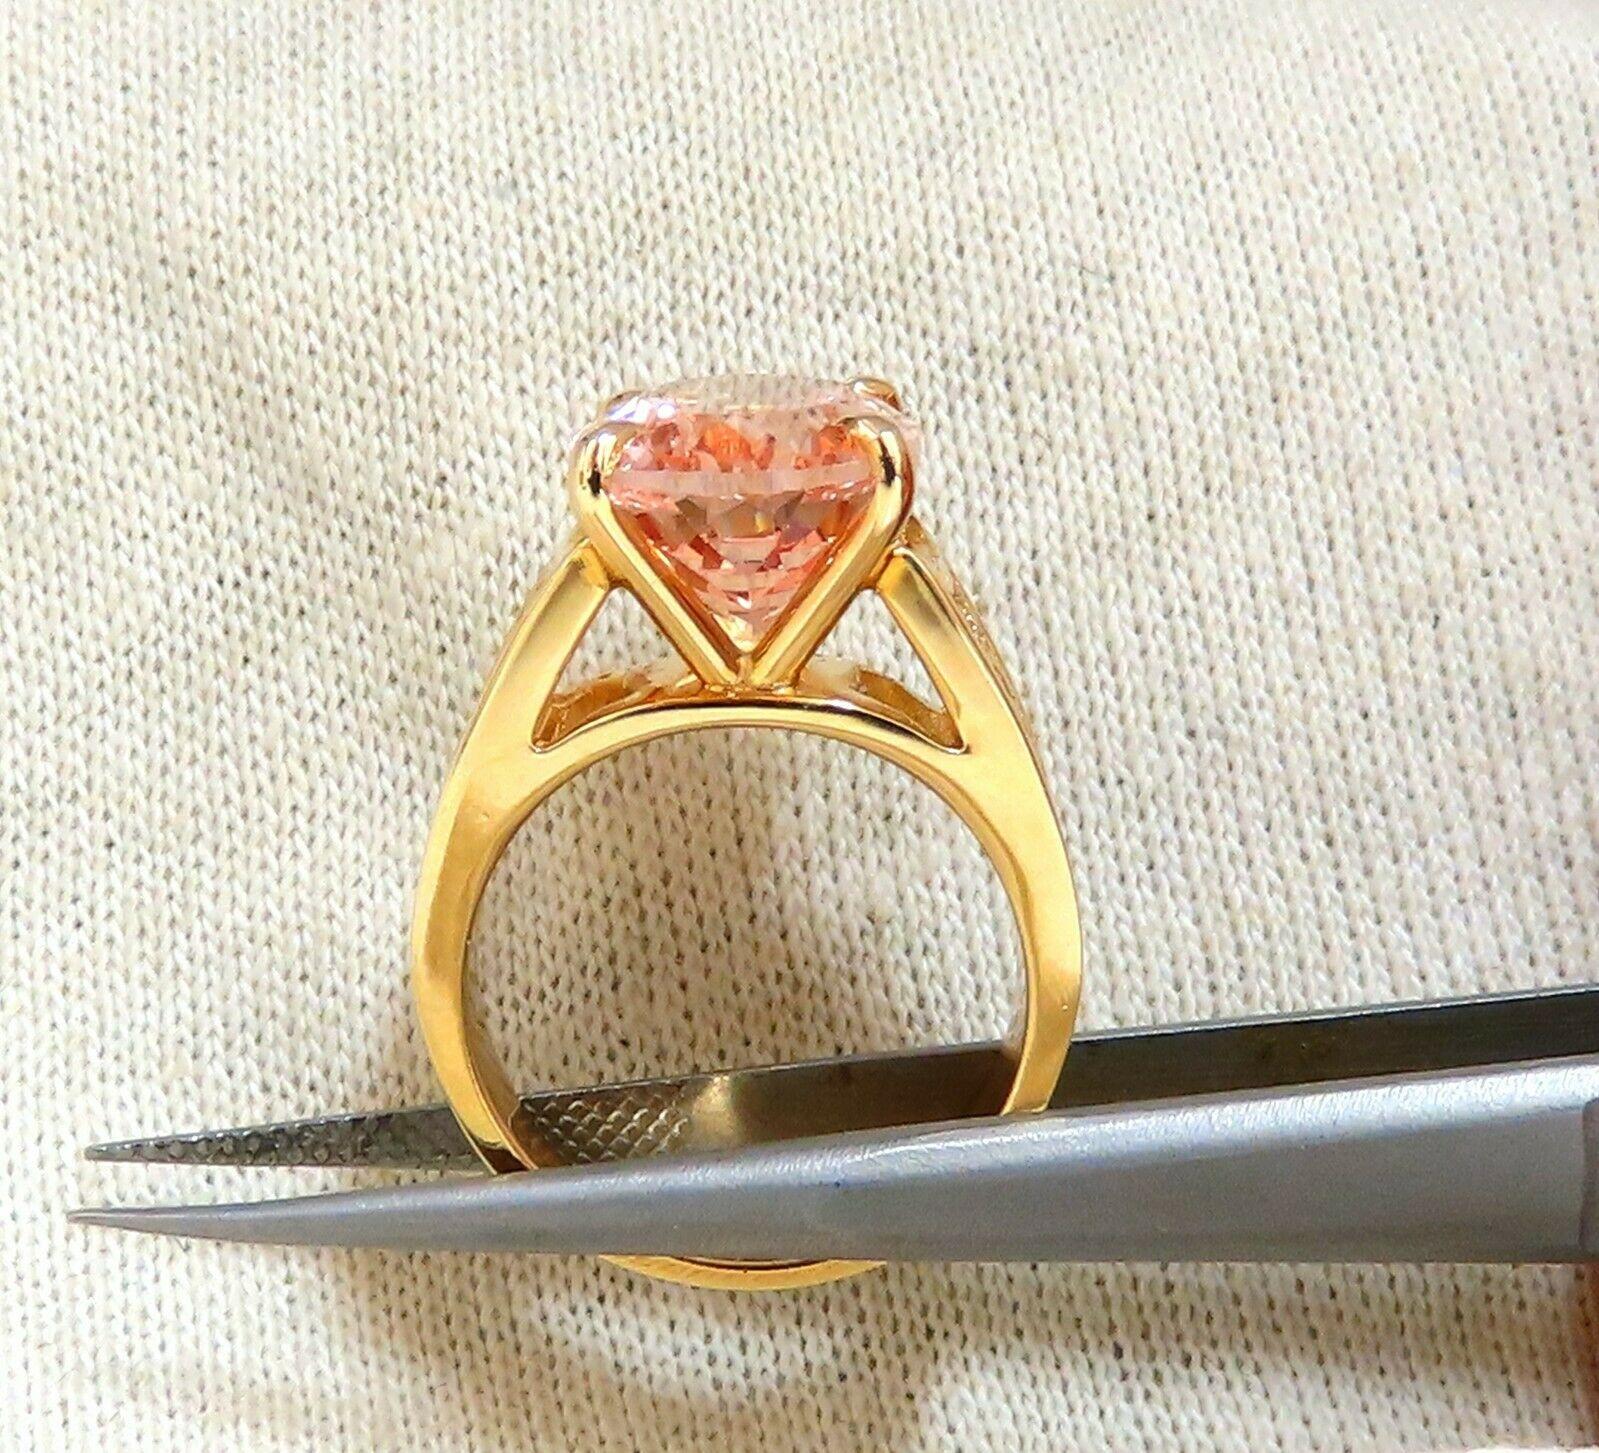 Traditional Raised Pink.

16.00ct. Natural Morganite Ring

14 X 10mm

Oval cut.

Bright Pink

Strong, even tone.



.90ct Natural Diamonds

I-color Vs-2 Clarity.

14kt. yellow gold

8.5 grams

Ring Current size: 6

Depth of ring: 9.7mm

(Free Resize